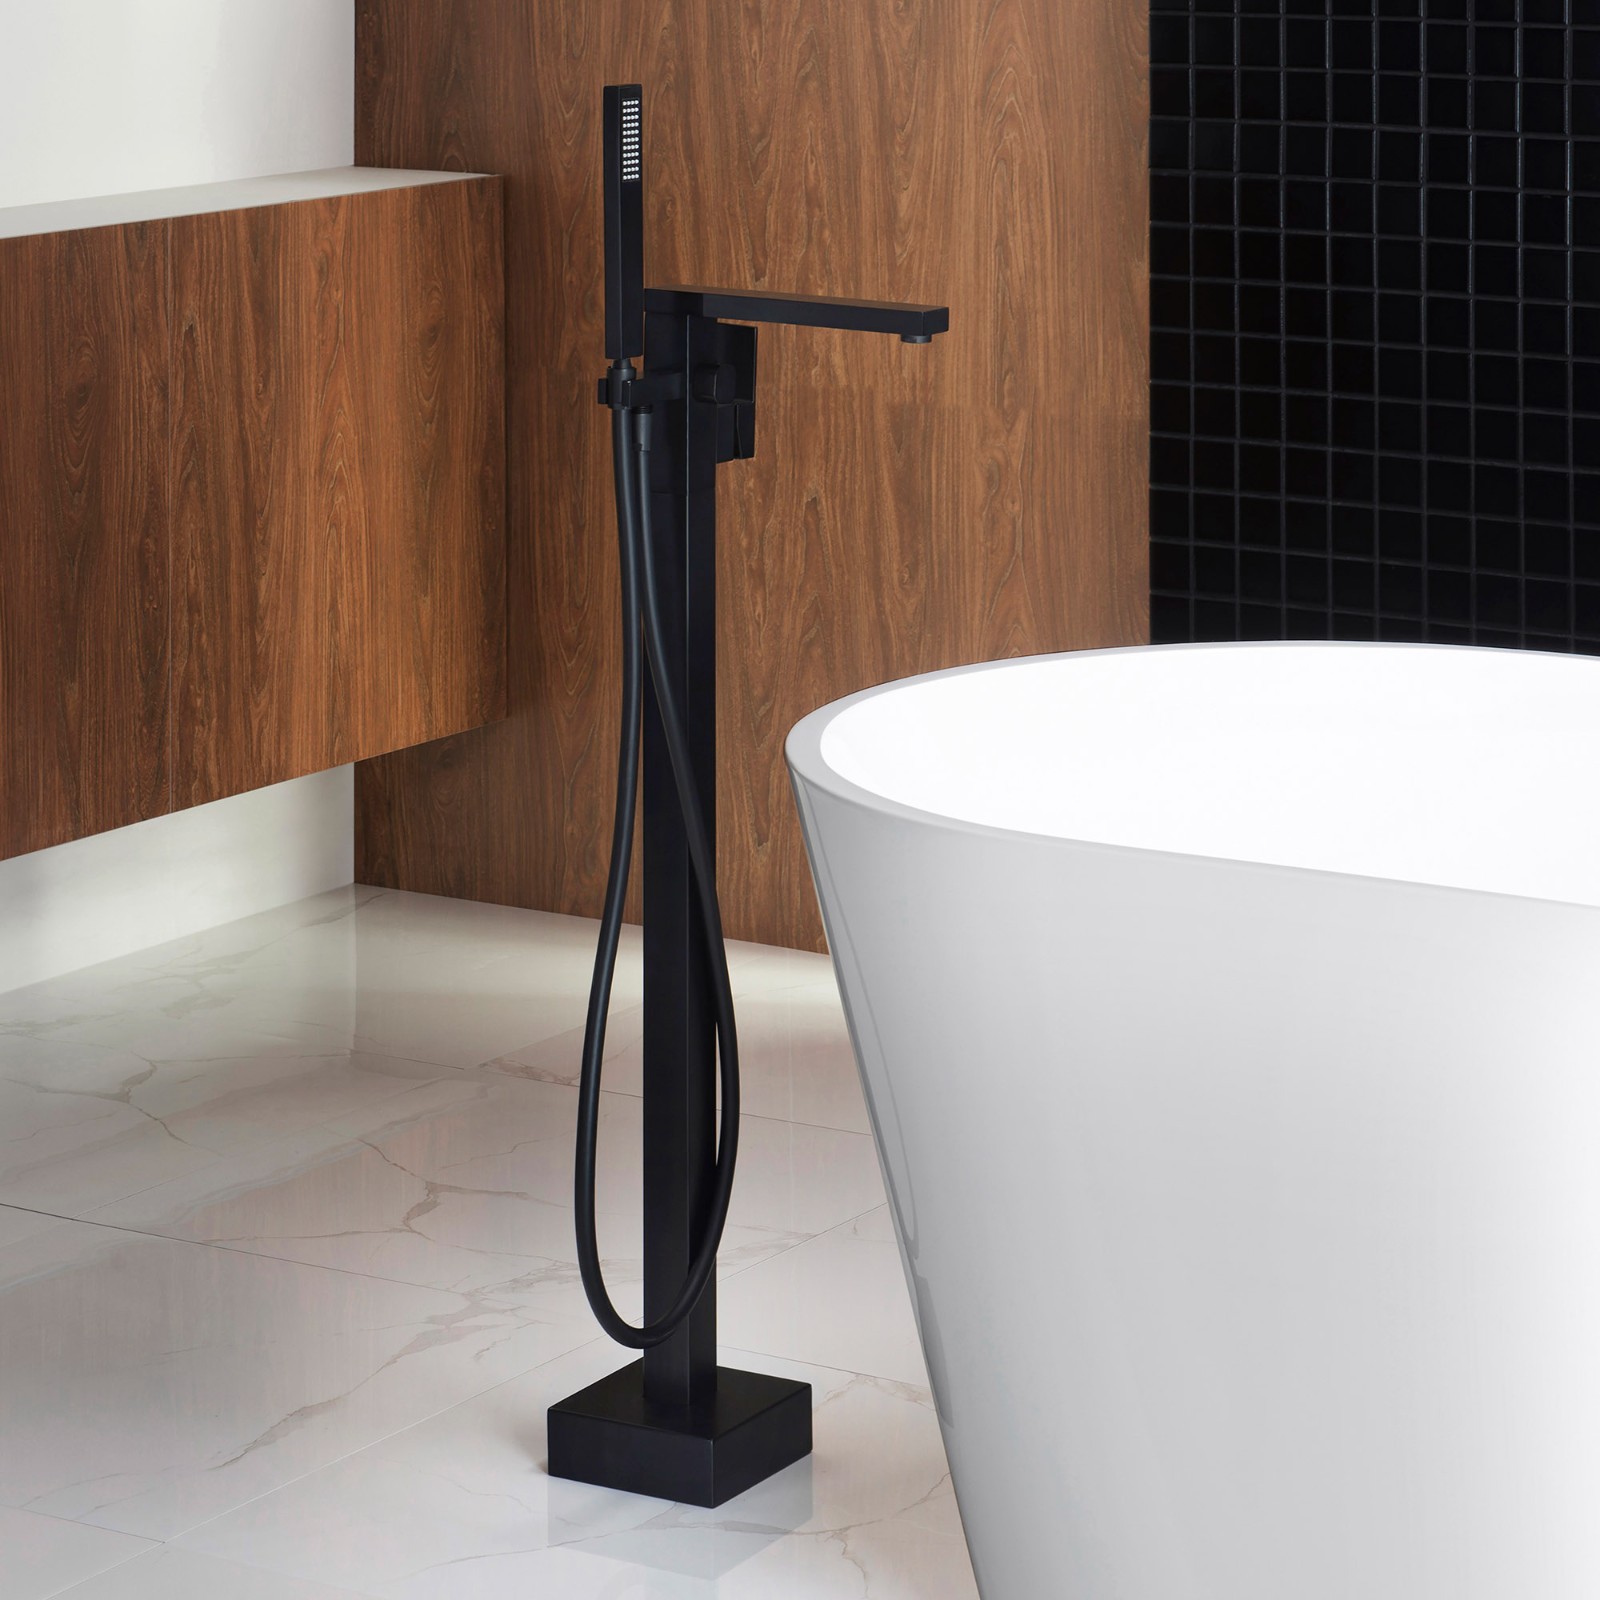  WOODBRIDGE F0009BL Contemporary Single Handle Floor Mount Freestanding Tub Filler Faucet with Hand shower in Matte Black Finish._4210